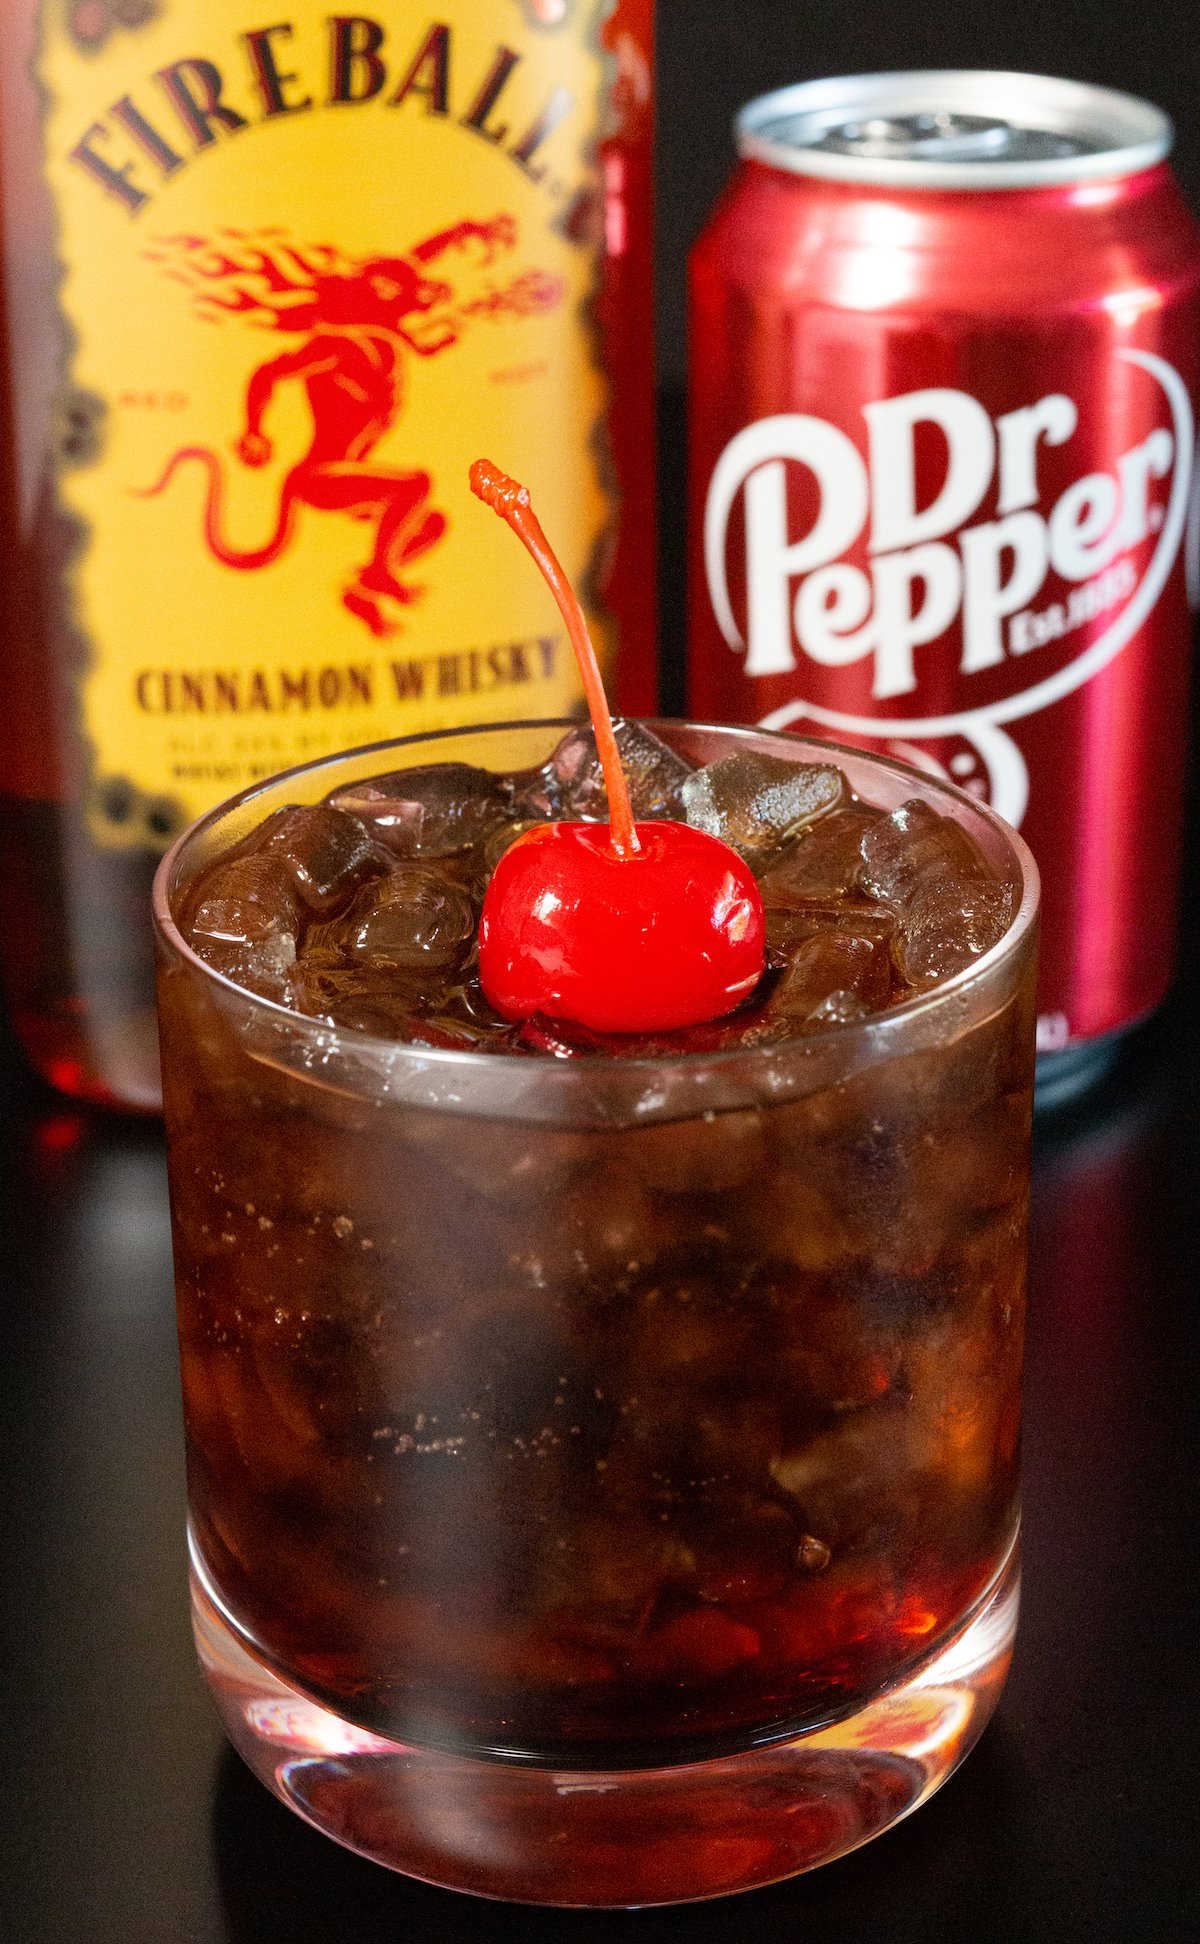 A rocks glass with fireball and dr. pepper sits in front of a bottle of each.